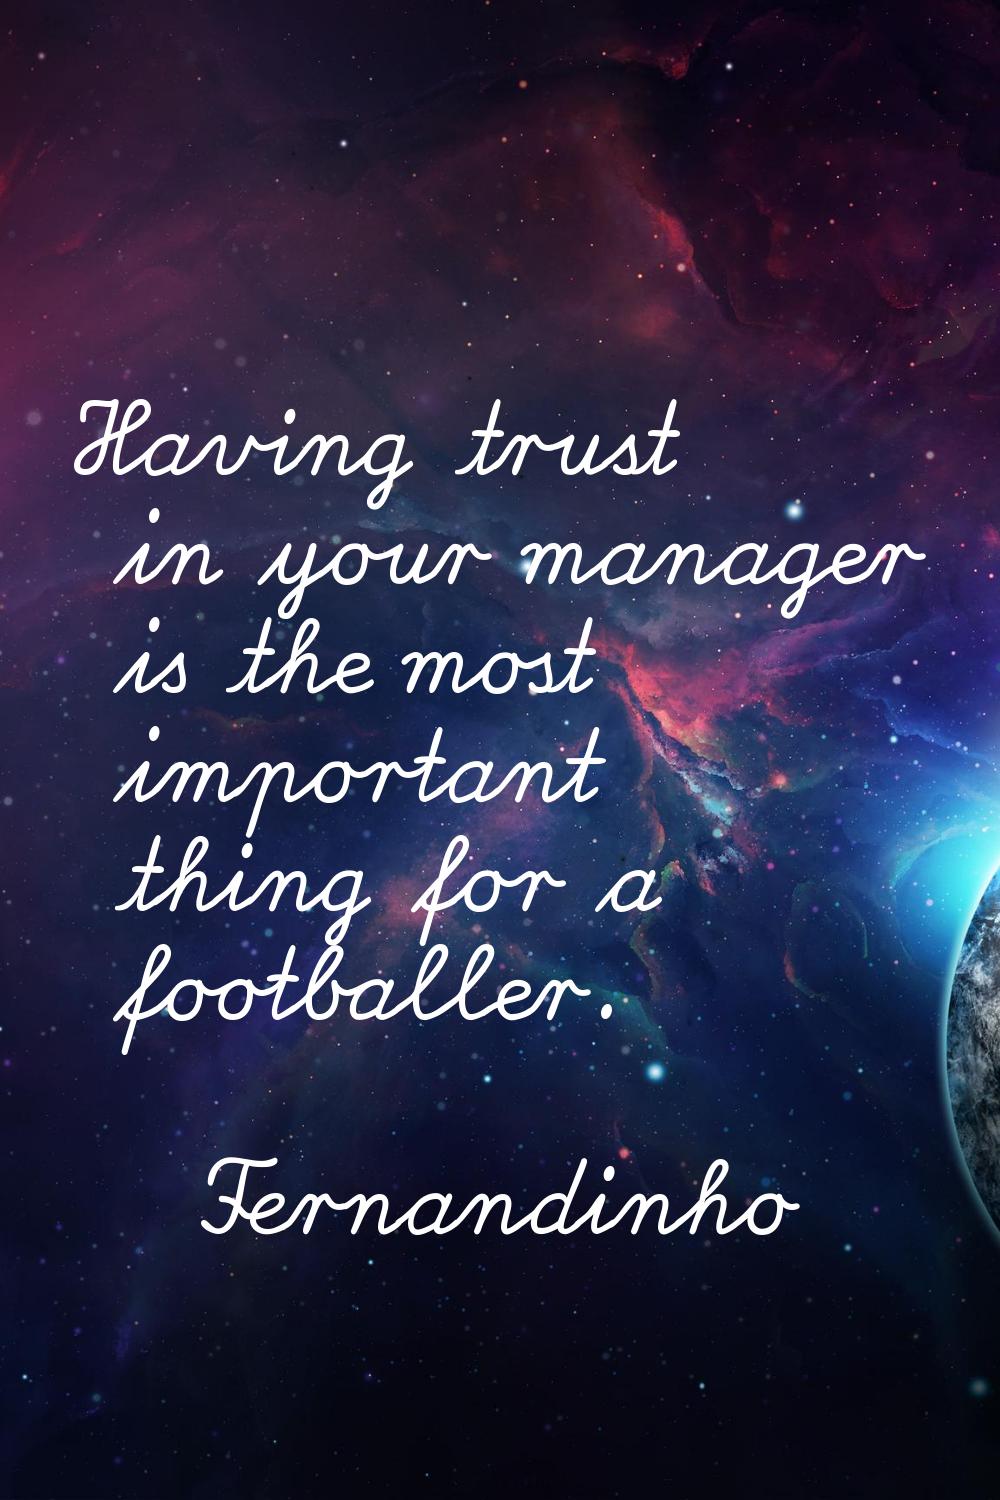 Having trust in your manager is the most important thing for a footballer.